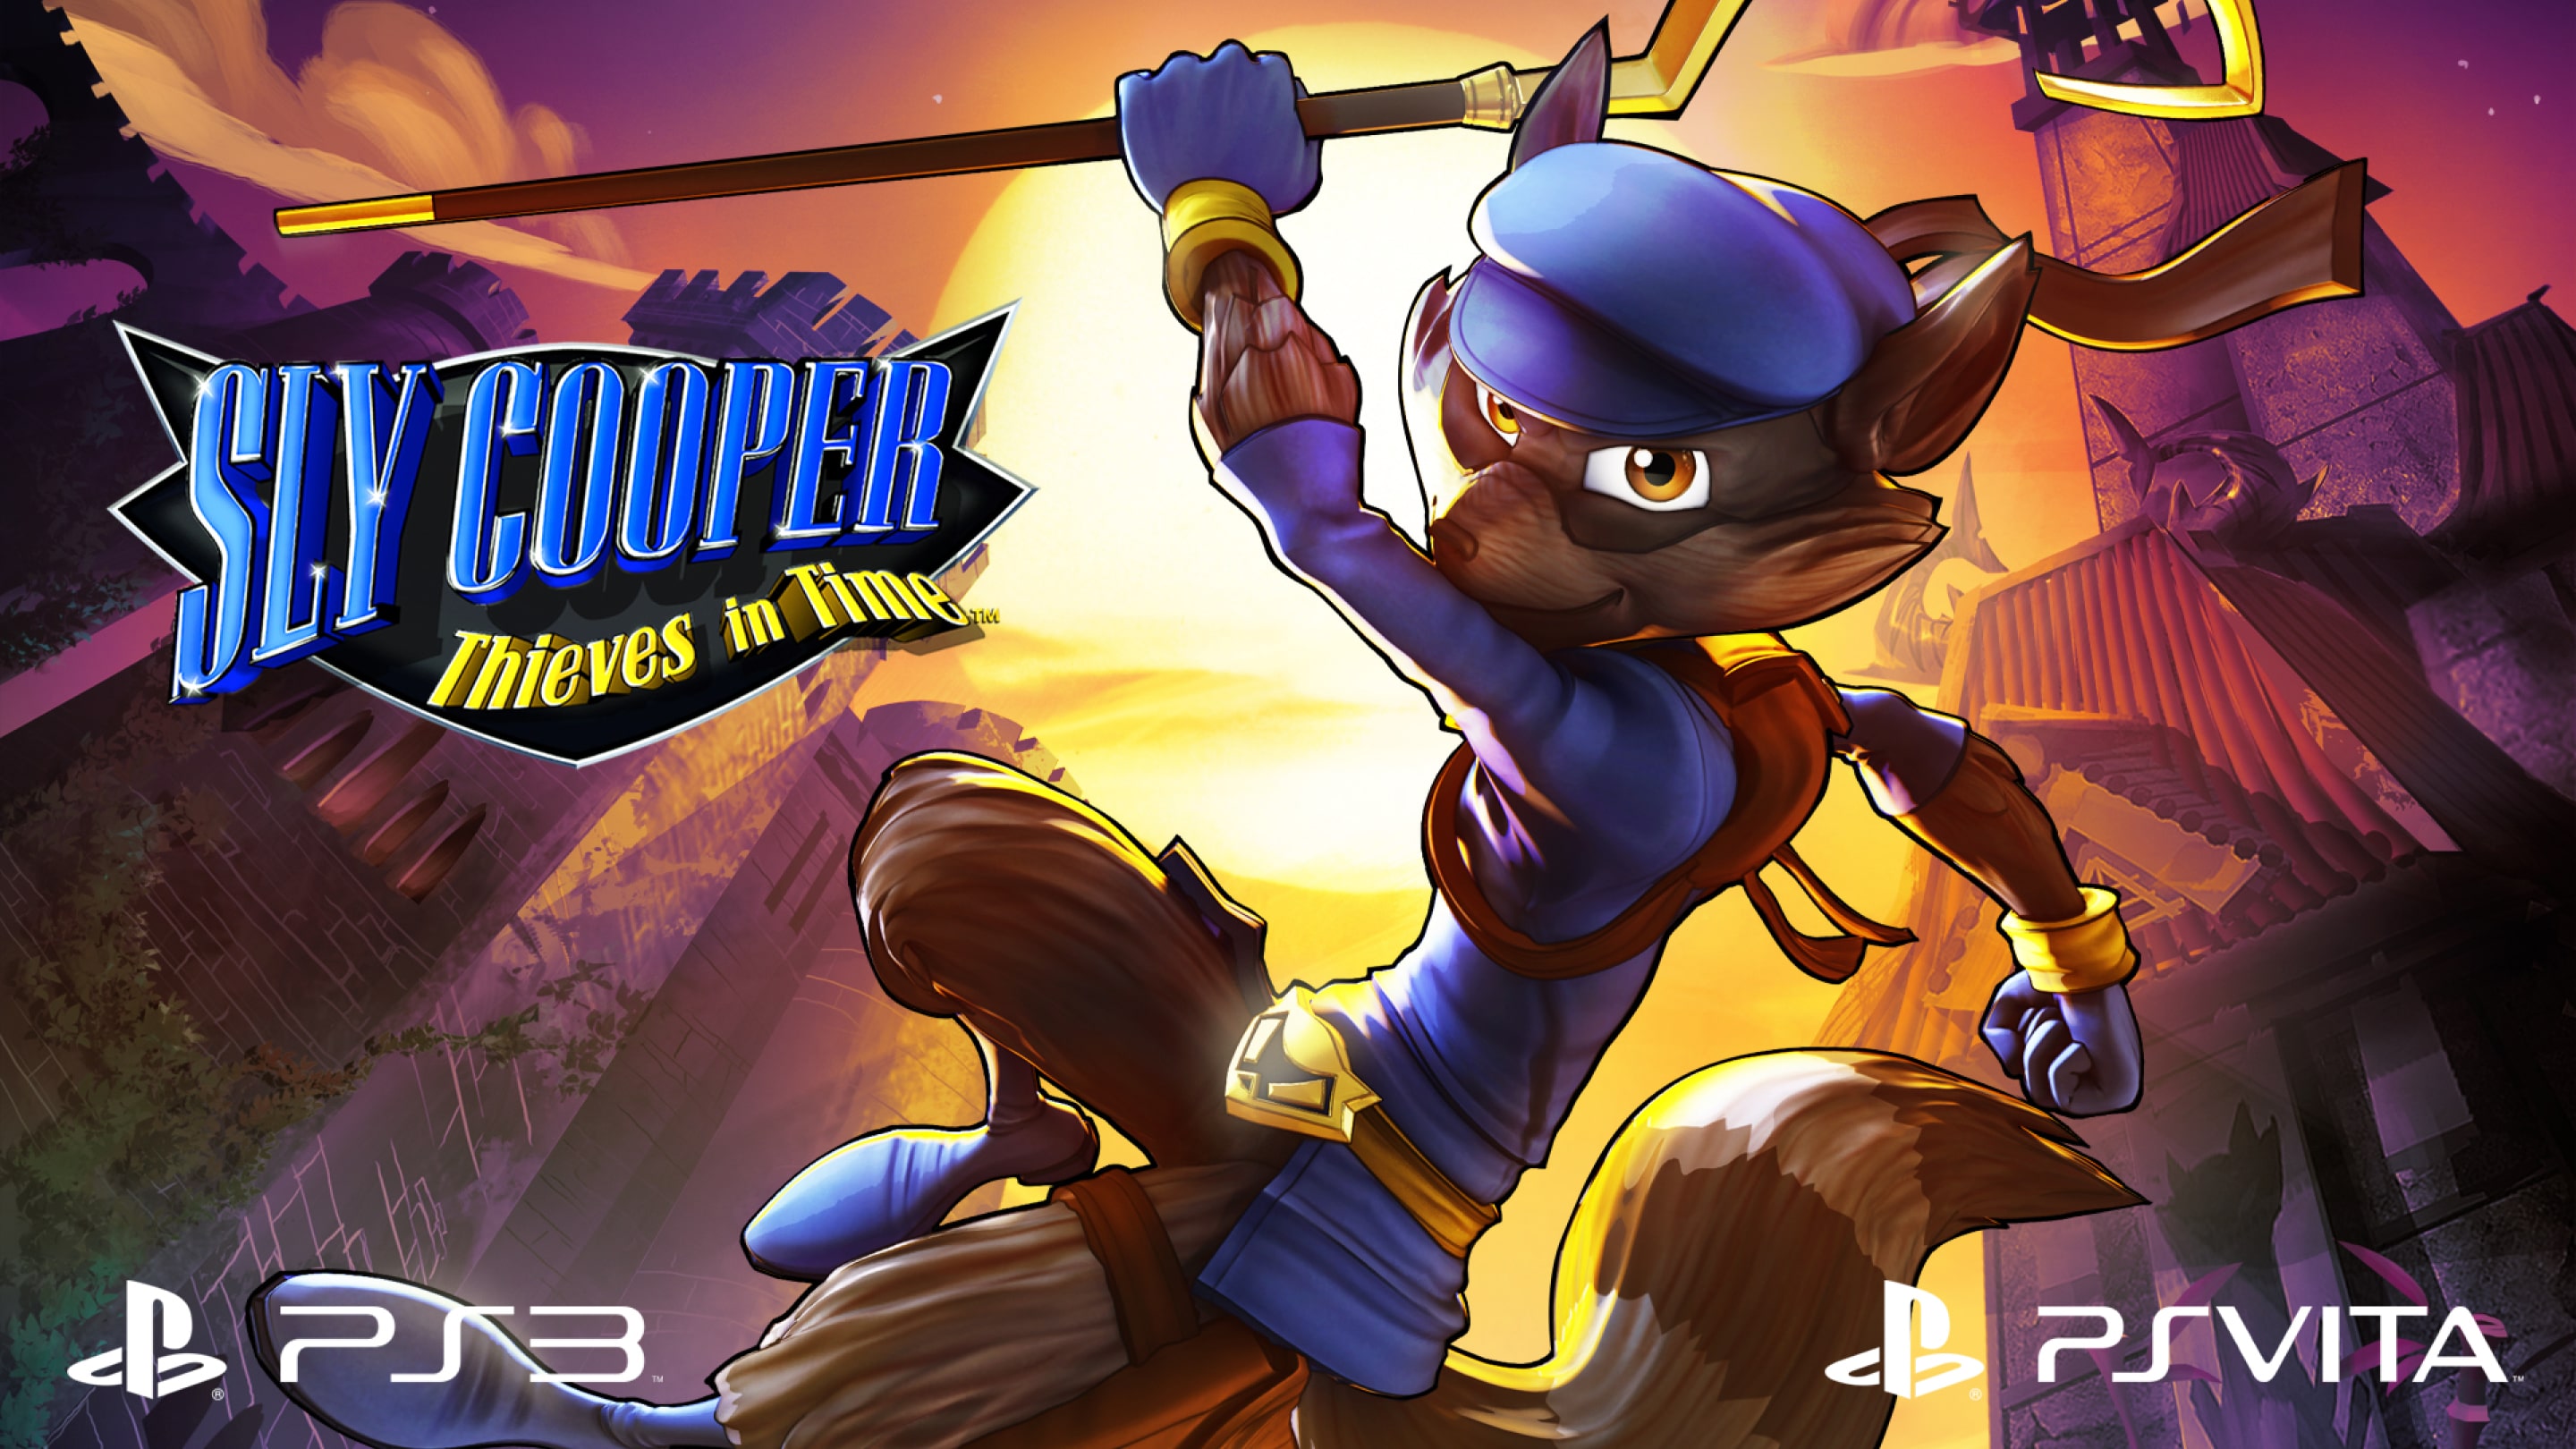 Sly cooper thieves in time game image